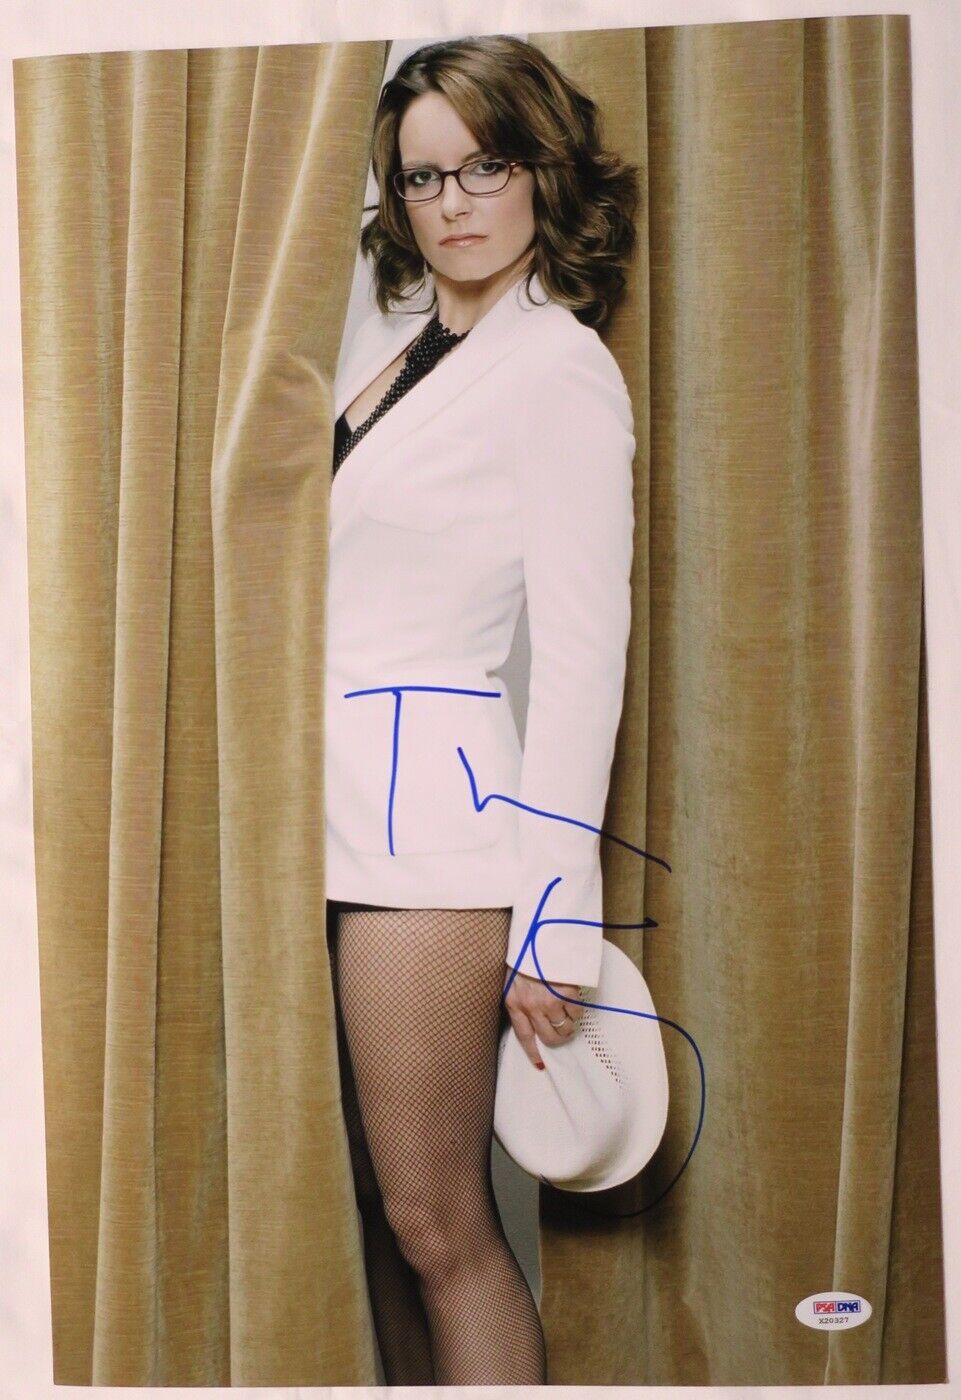 Tina Fey Signed Authentic Autographed 12x18 Photo Poster painting PSA/DNA #X20327